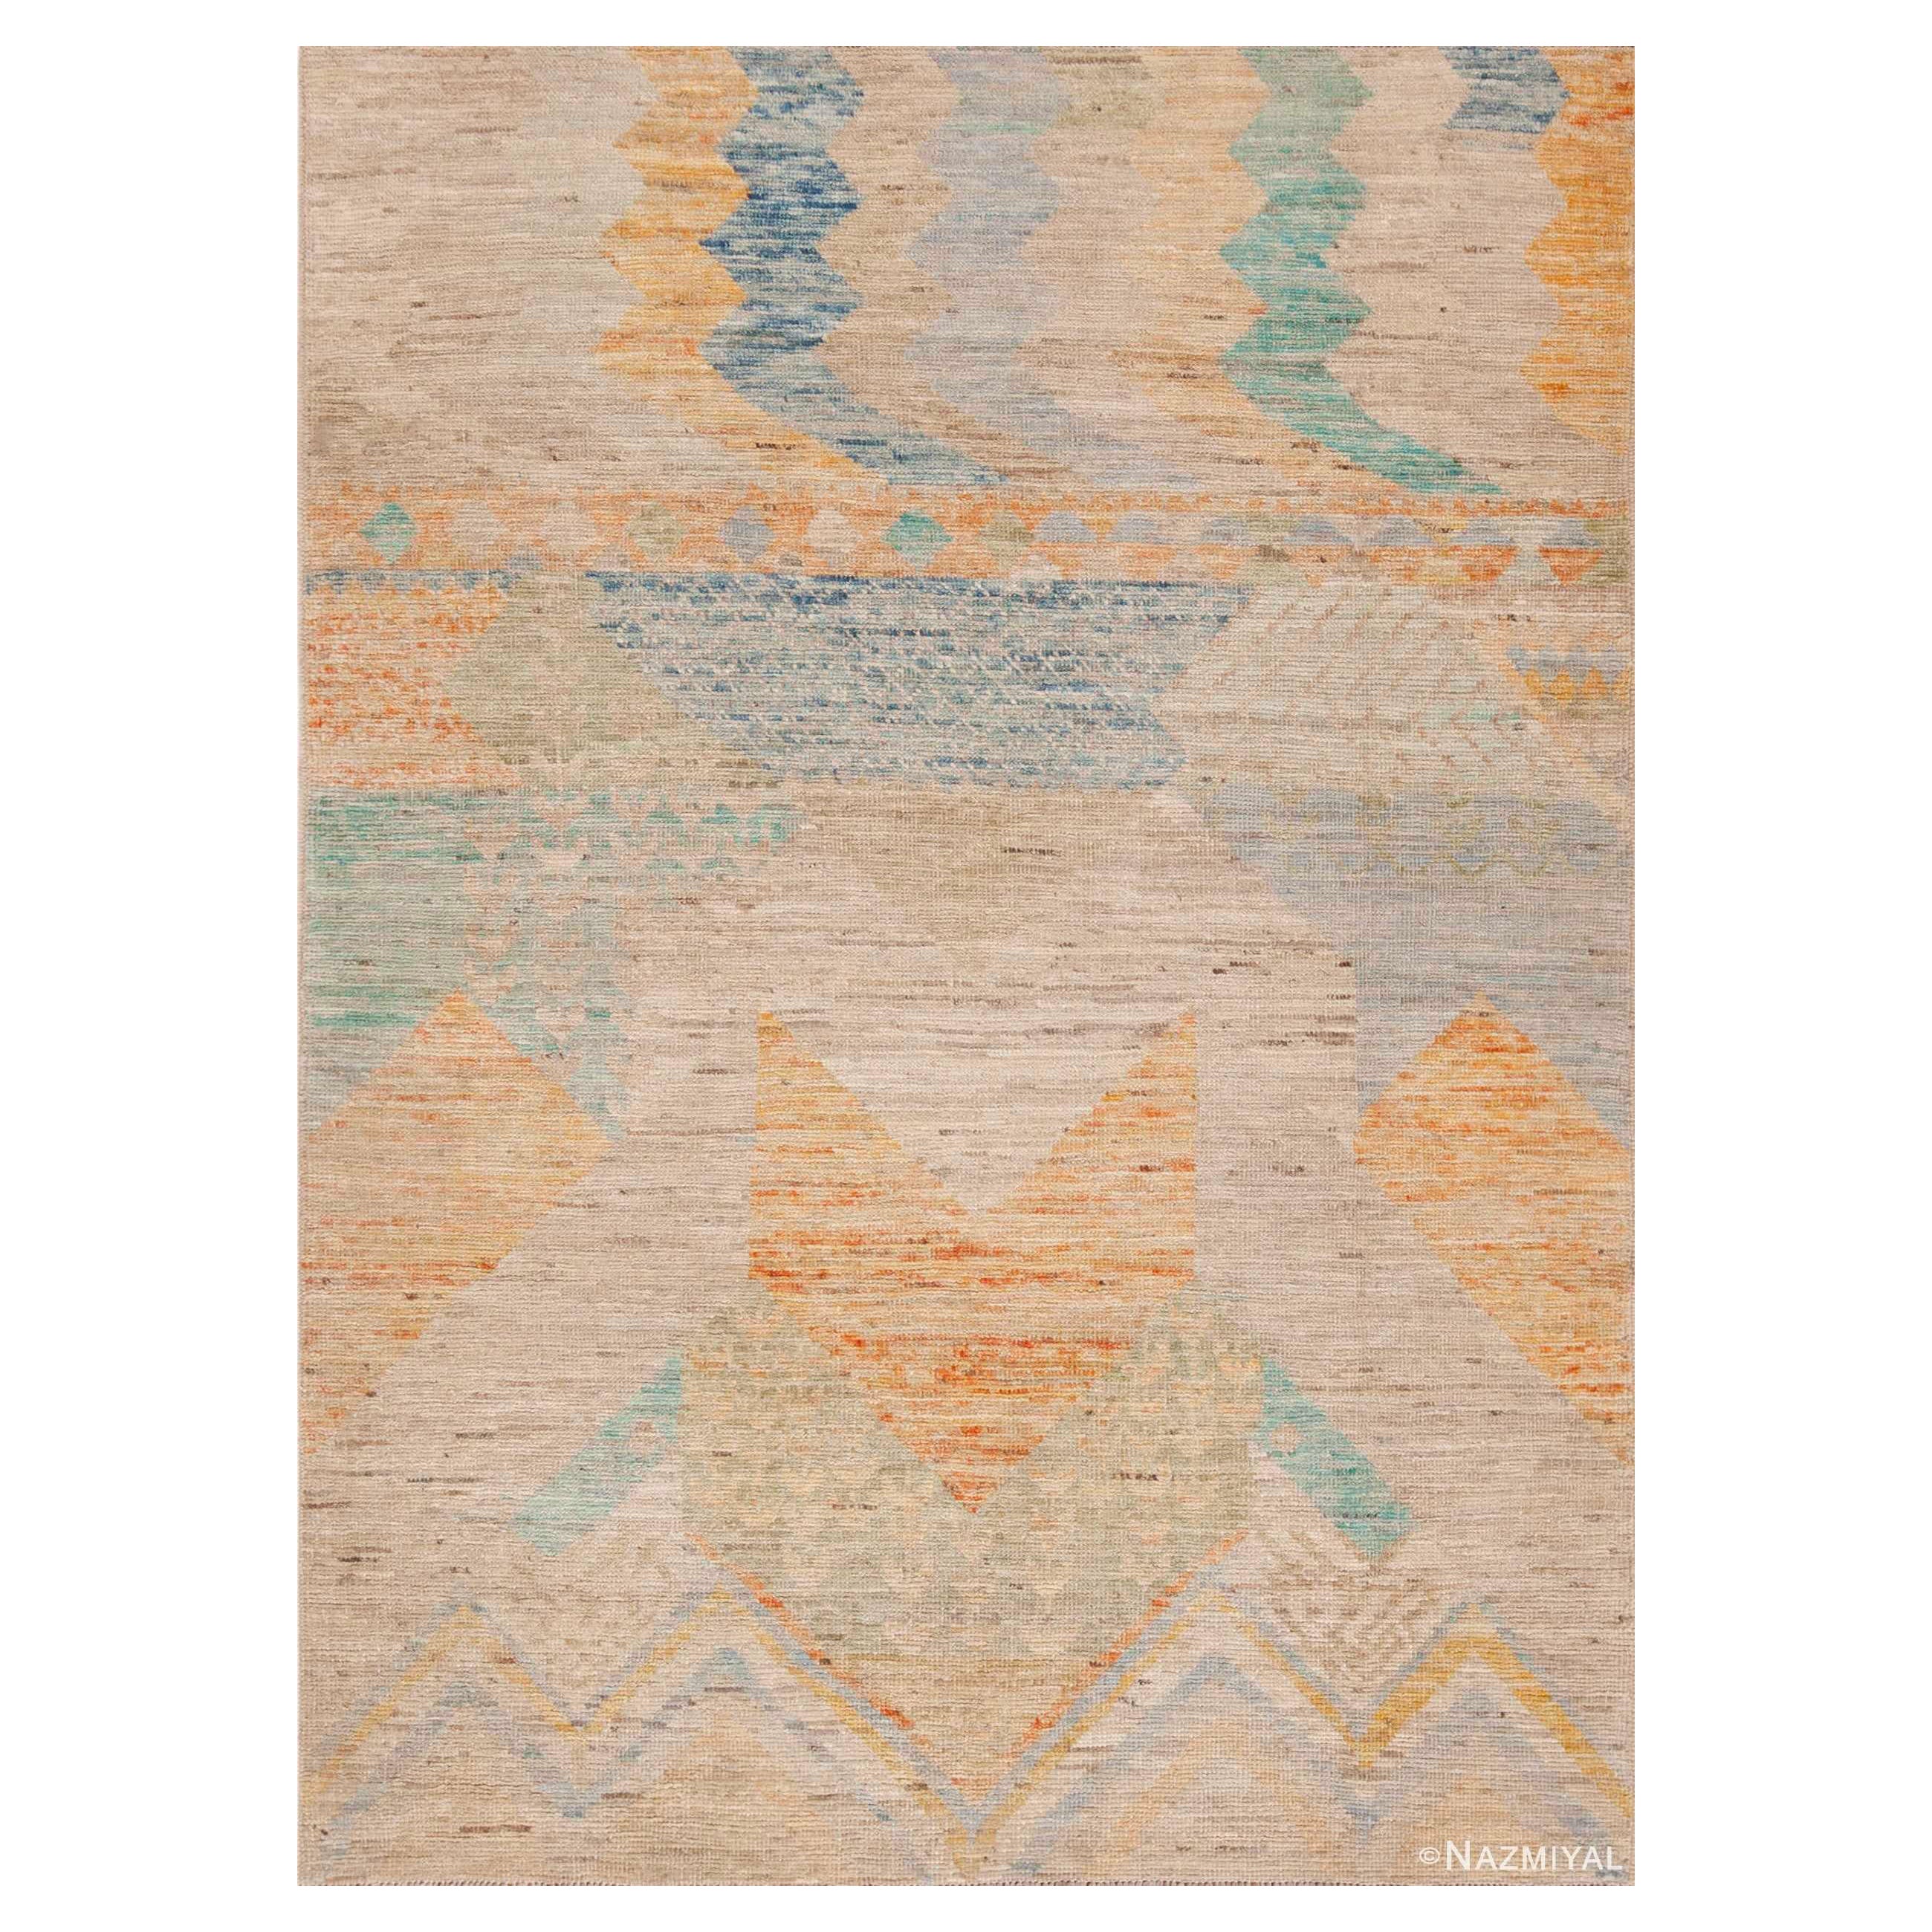 Nazmiyal Collection Tribal Modern Small Scatter Size Area Rug 4'2" x 5'8" For Sale